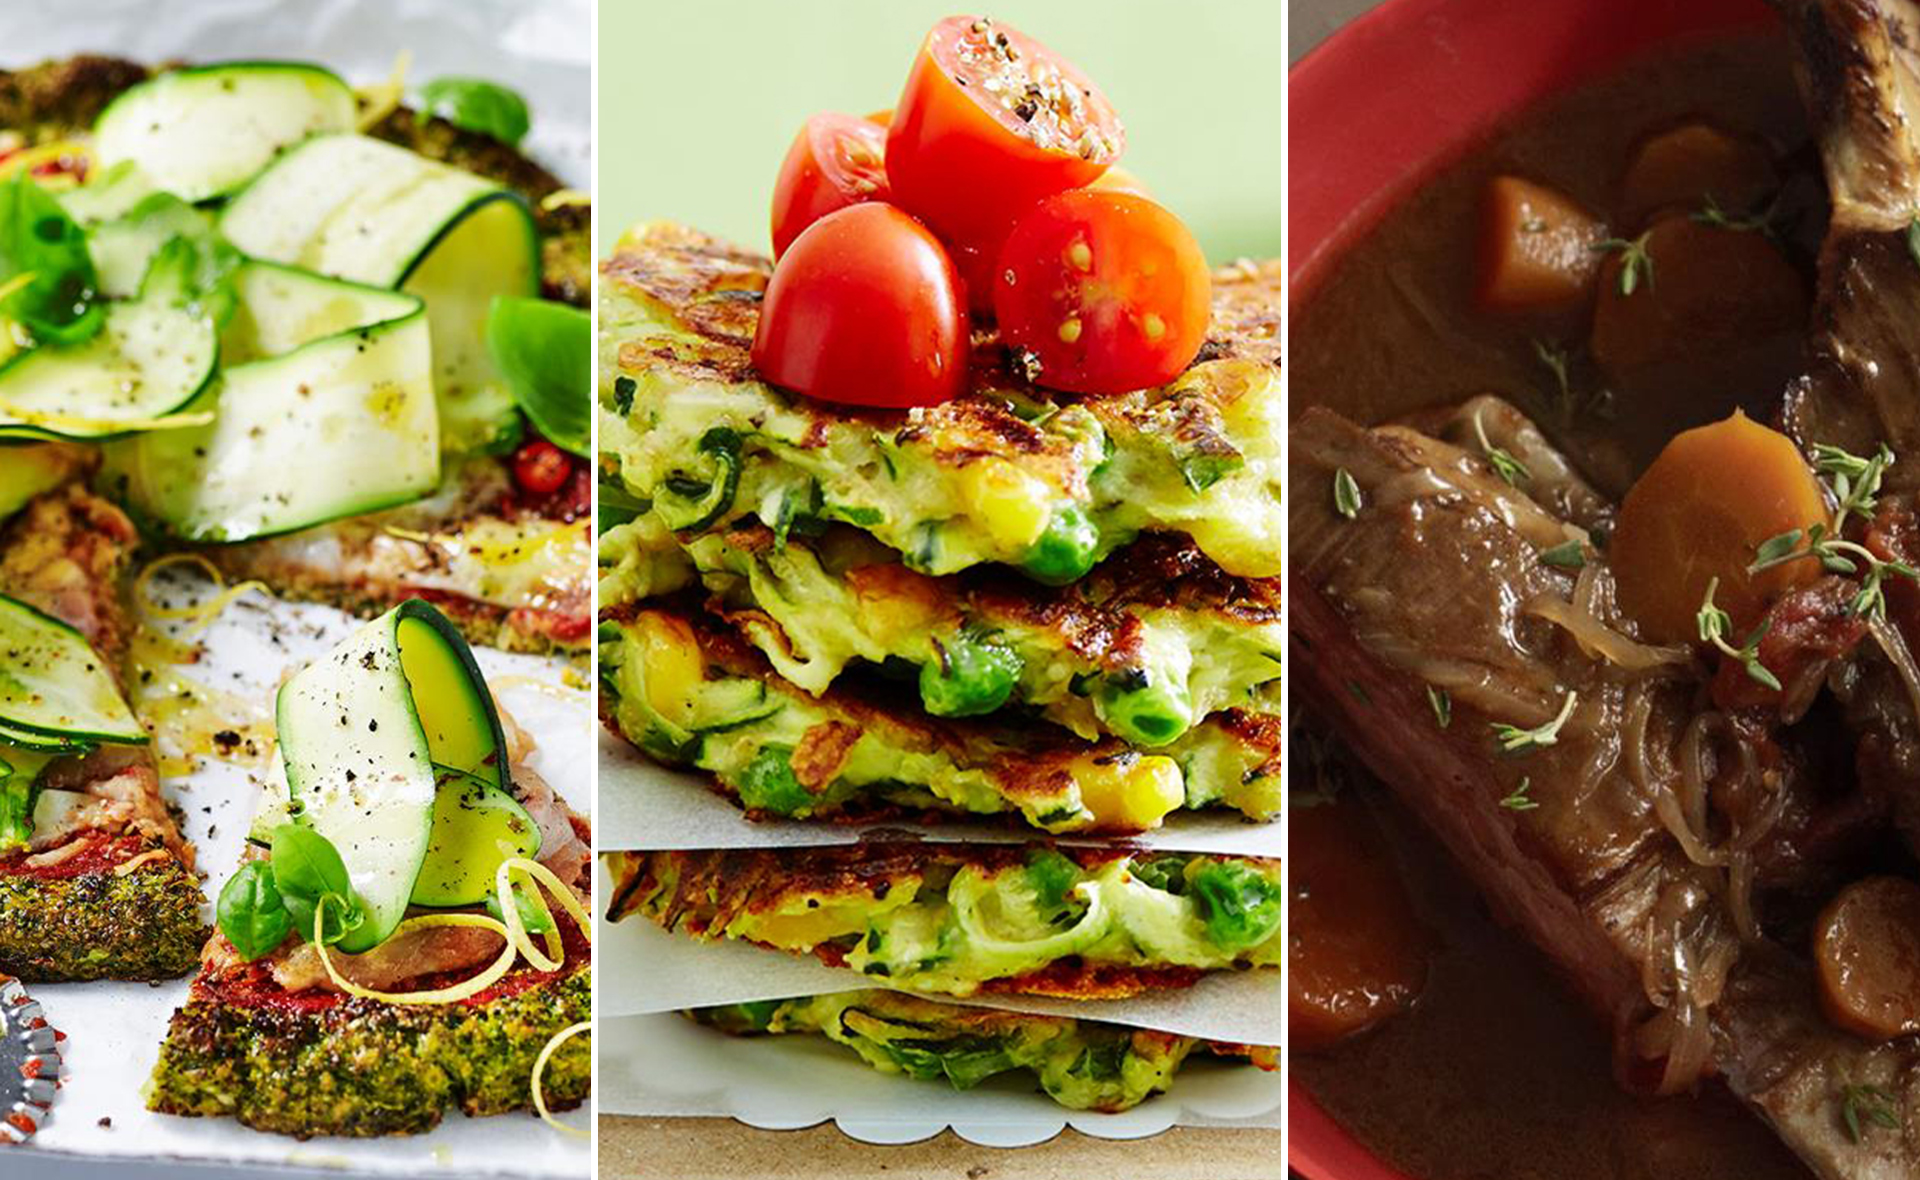 Delicious dishes for St Patrick’s Day that will get you in the Irish spirit